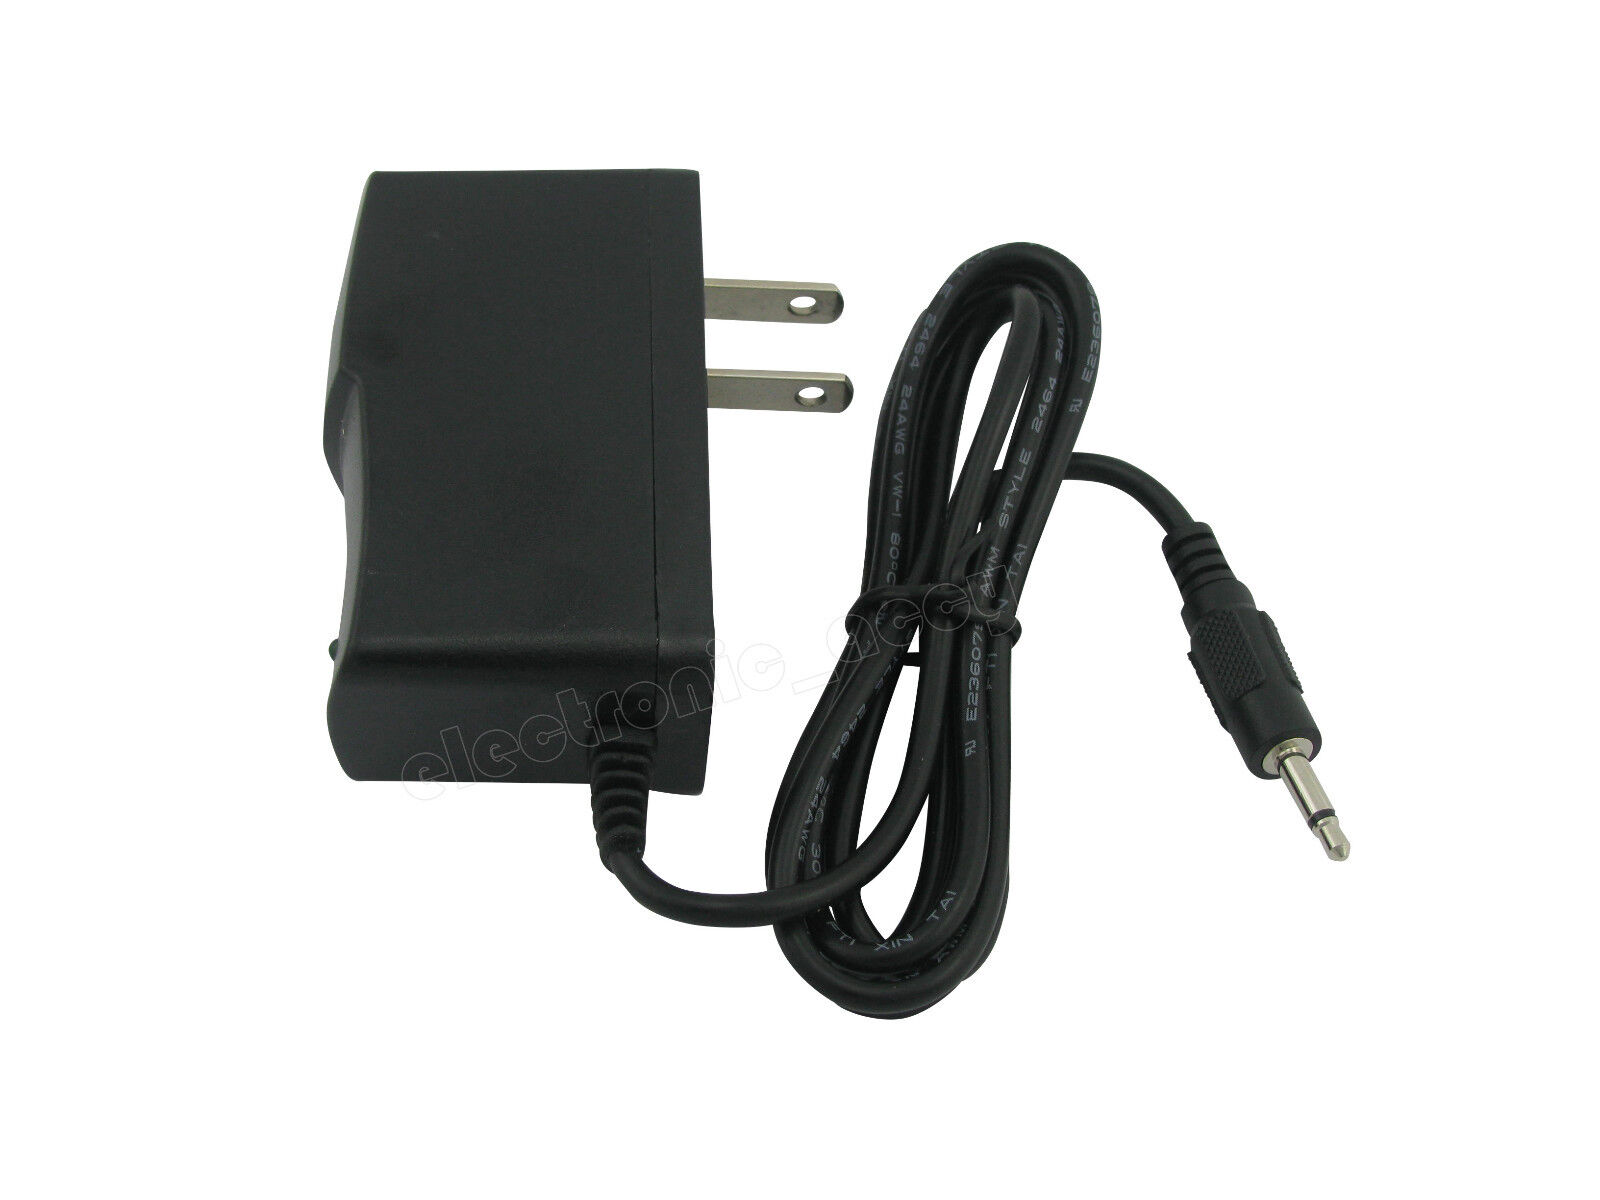 AC Adapter for Shark VM252 T6 VM252T6 Vacuum power supply charger Type AC/DC Adapter Connection Split/Duplication 1: